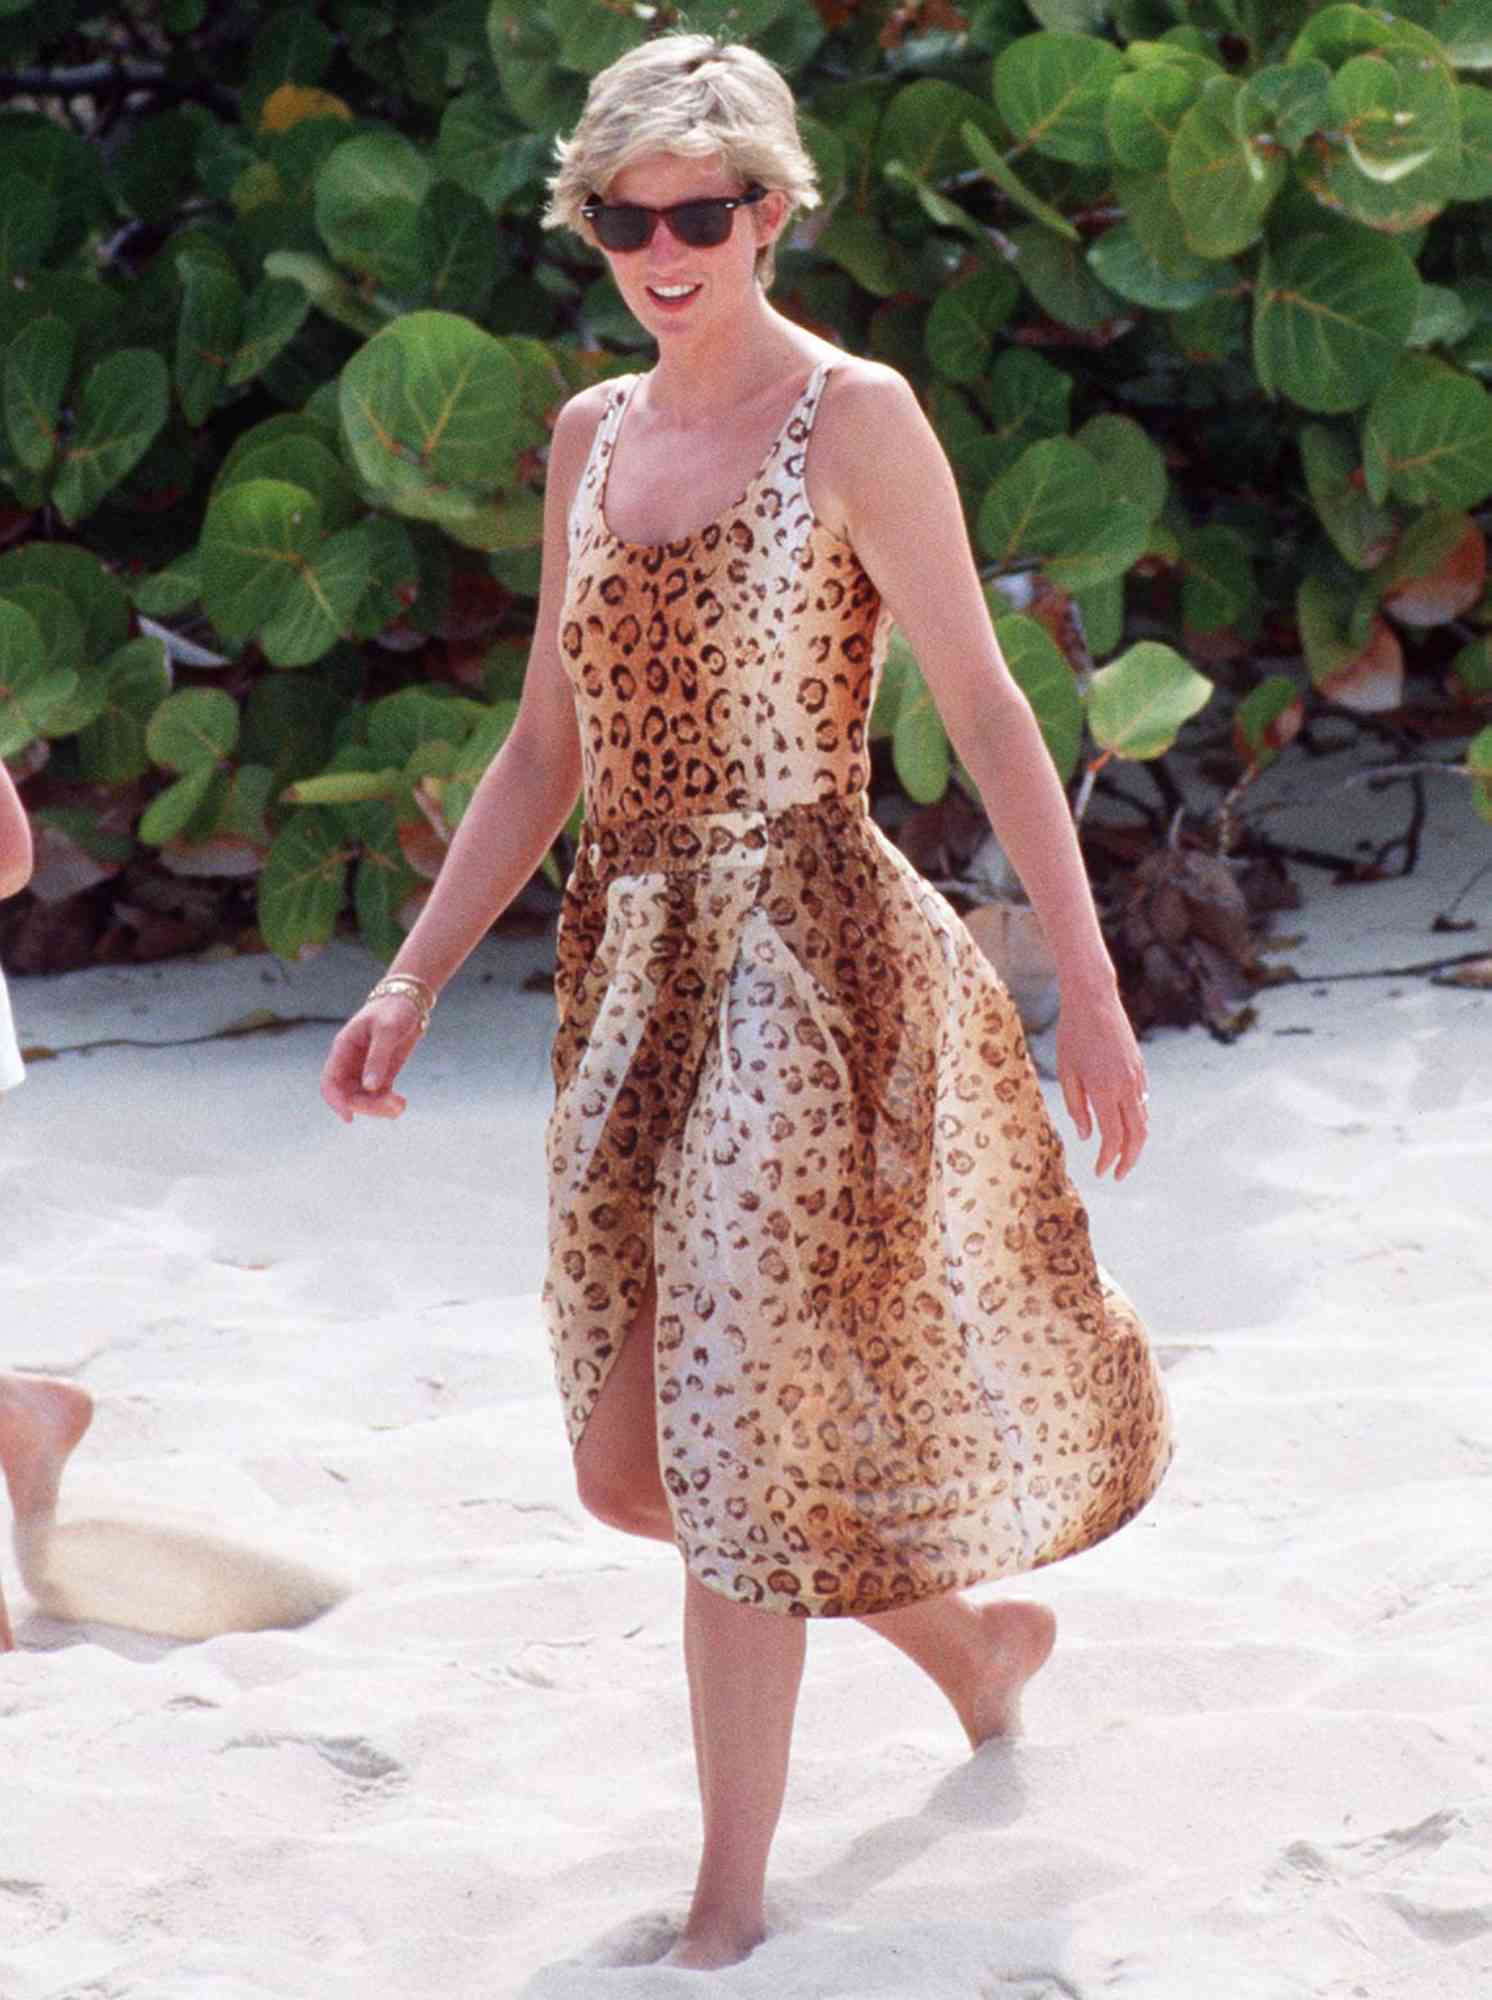 Princess Diana In Leopardskin Swimming Costume And Sarong On Holiday In Necker Island In The Caribbean